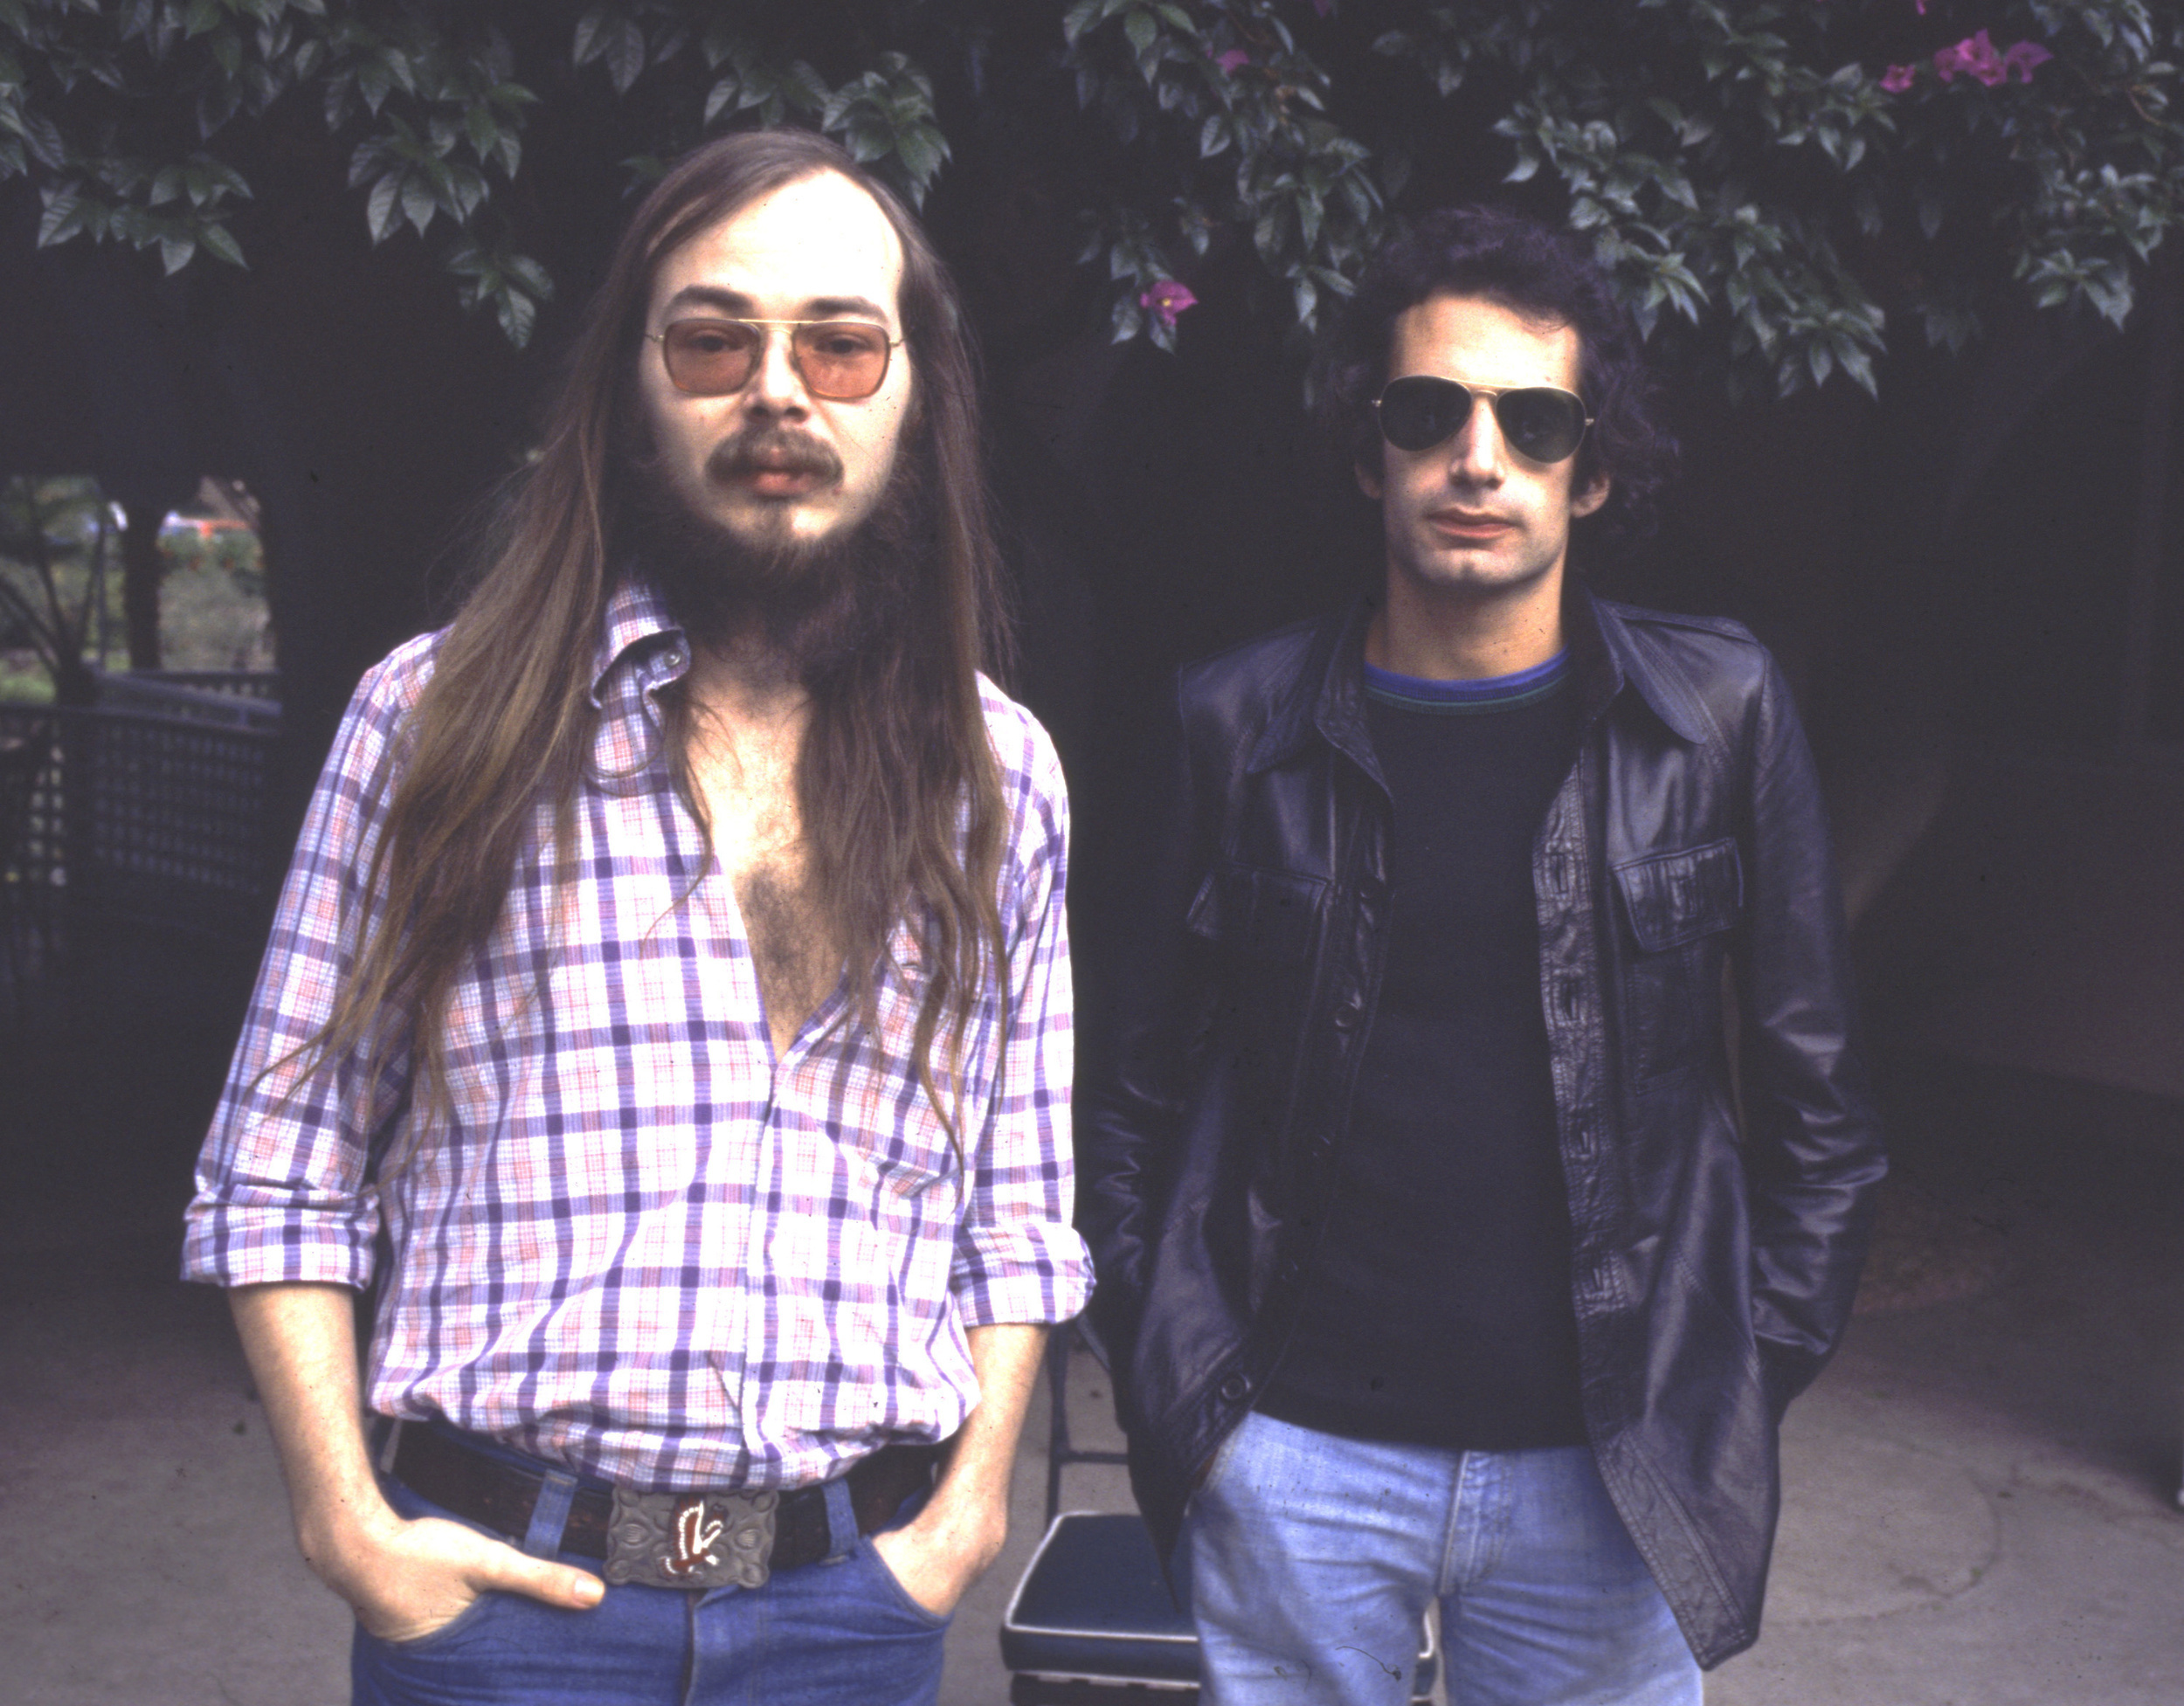 <p>Steely Dan was, in its prime, under the direction of celebrated songwriters Donald Fagan and Walter Becker, many things regarding a collective sound. Rock, pop, jazz, blues. Usually melodic, well within the soft-rock category. Songs like <a href="https://www.youtube.com/watch?v=LI7NDDQLvbo">"Peg,"</a> from the 1977 masterpiece <em>Aja</em>, certainly has a yacht rock vibe, too. Perhaps most notably is that the great Michael McDonald, longtime frontman of the Doobie Brothers and driving singer-songwriter in the soft/yacht rock circles, provides backing vocals on the track. </p><p>You may also like: <a href='https://www.yardbarker.com/entertainment/articles/notable_music_artists_who_play_multiple_instruments_quite_well_111723/s1__39216248'>Notable music artists who play multiple instruments quite well</a></p>